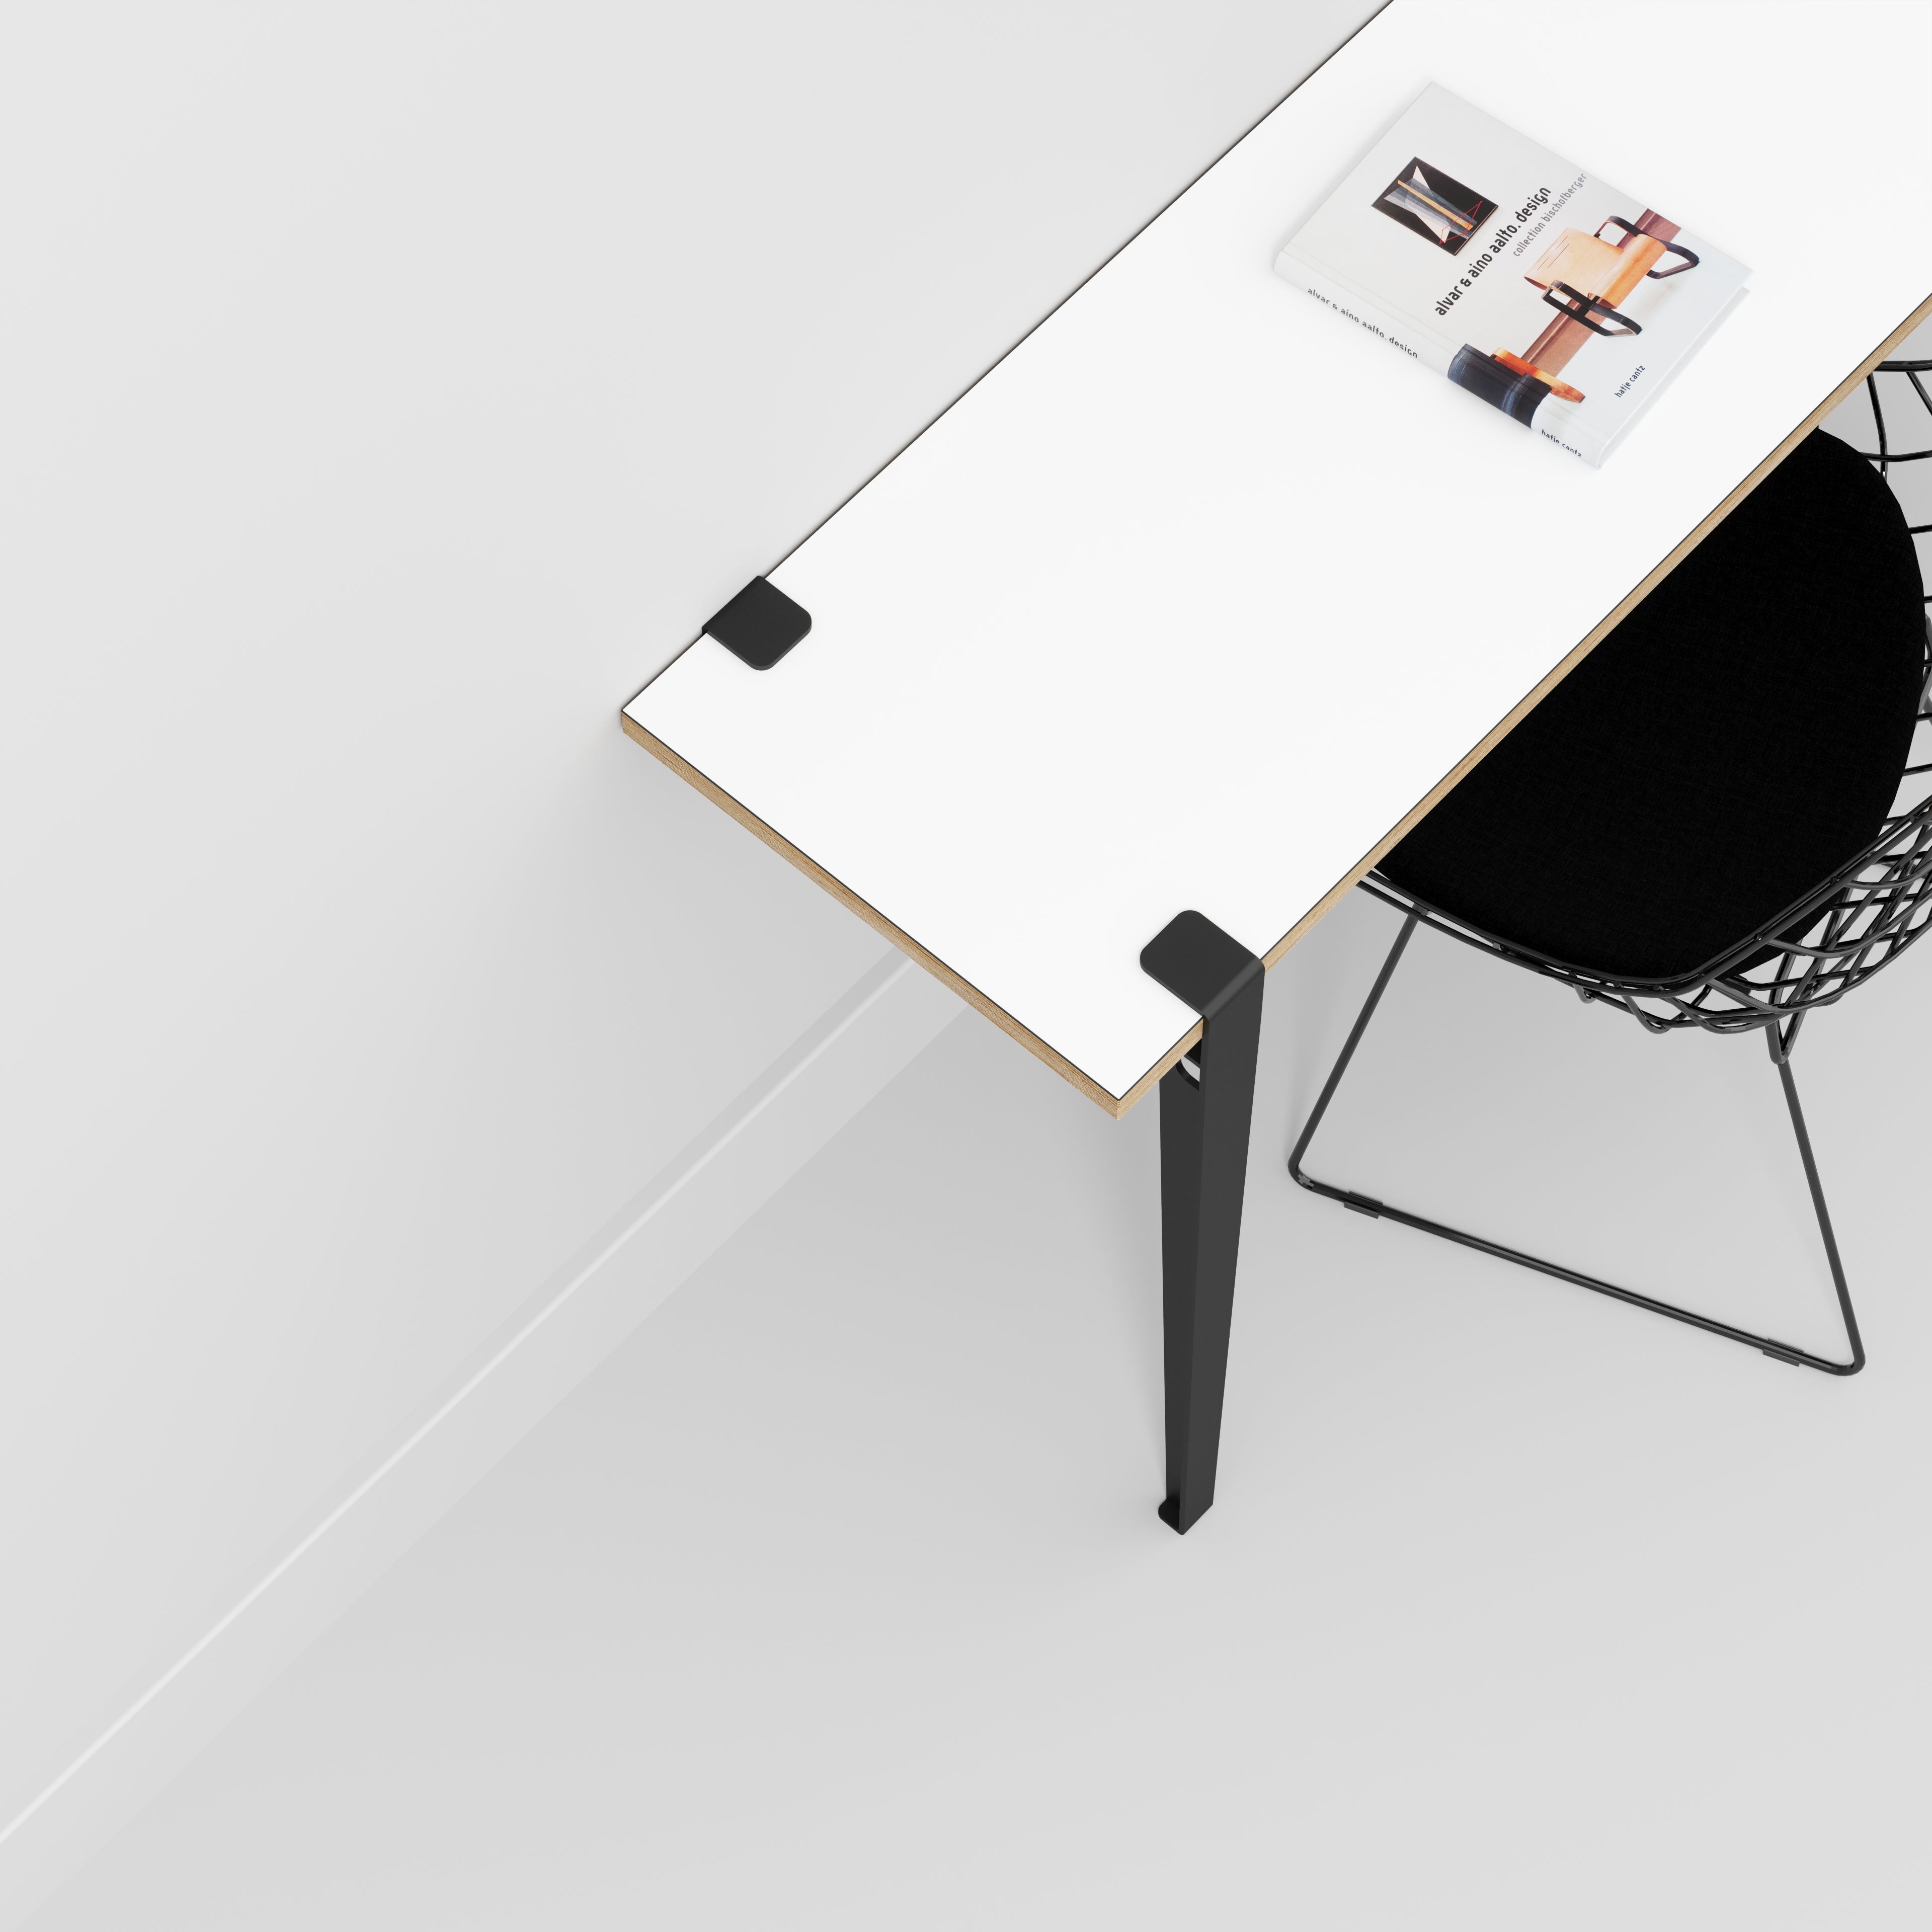 Wall Desk with Black Tiptoe Legs and Brackets - Formica White - 1200(w) x 400(d) x 750(h)